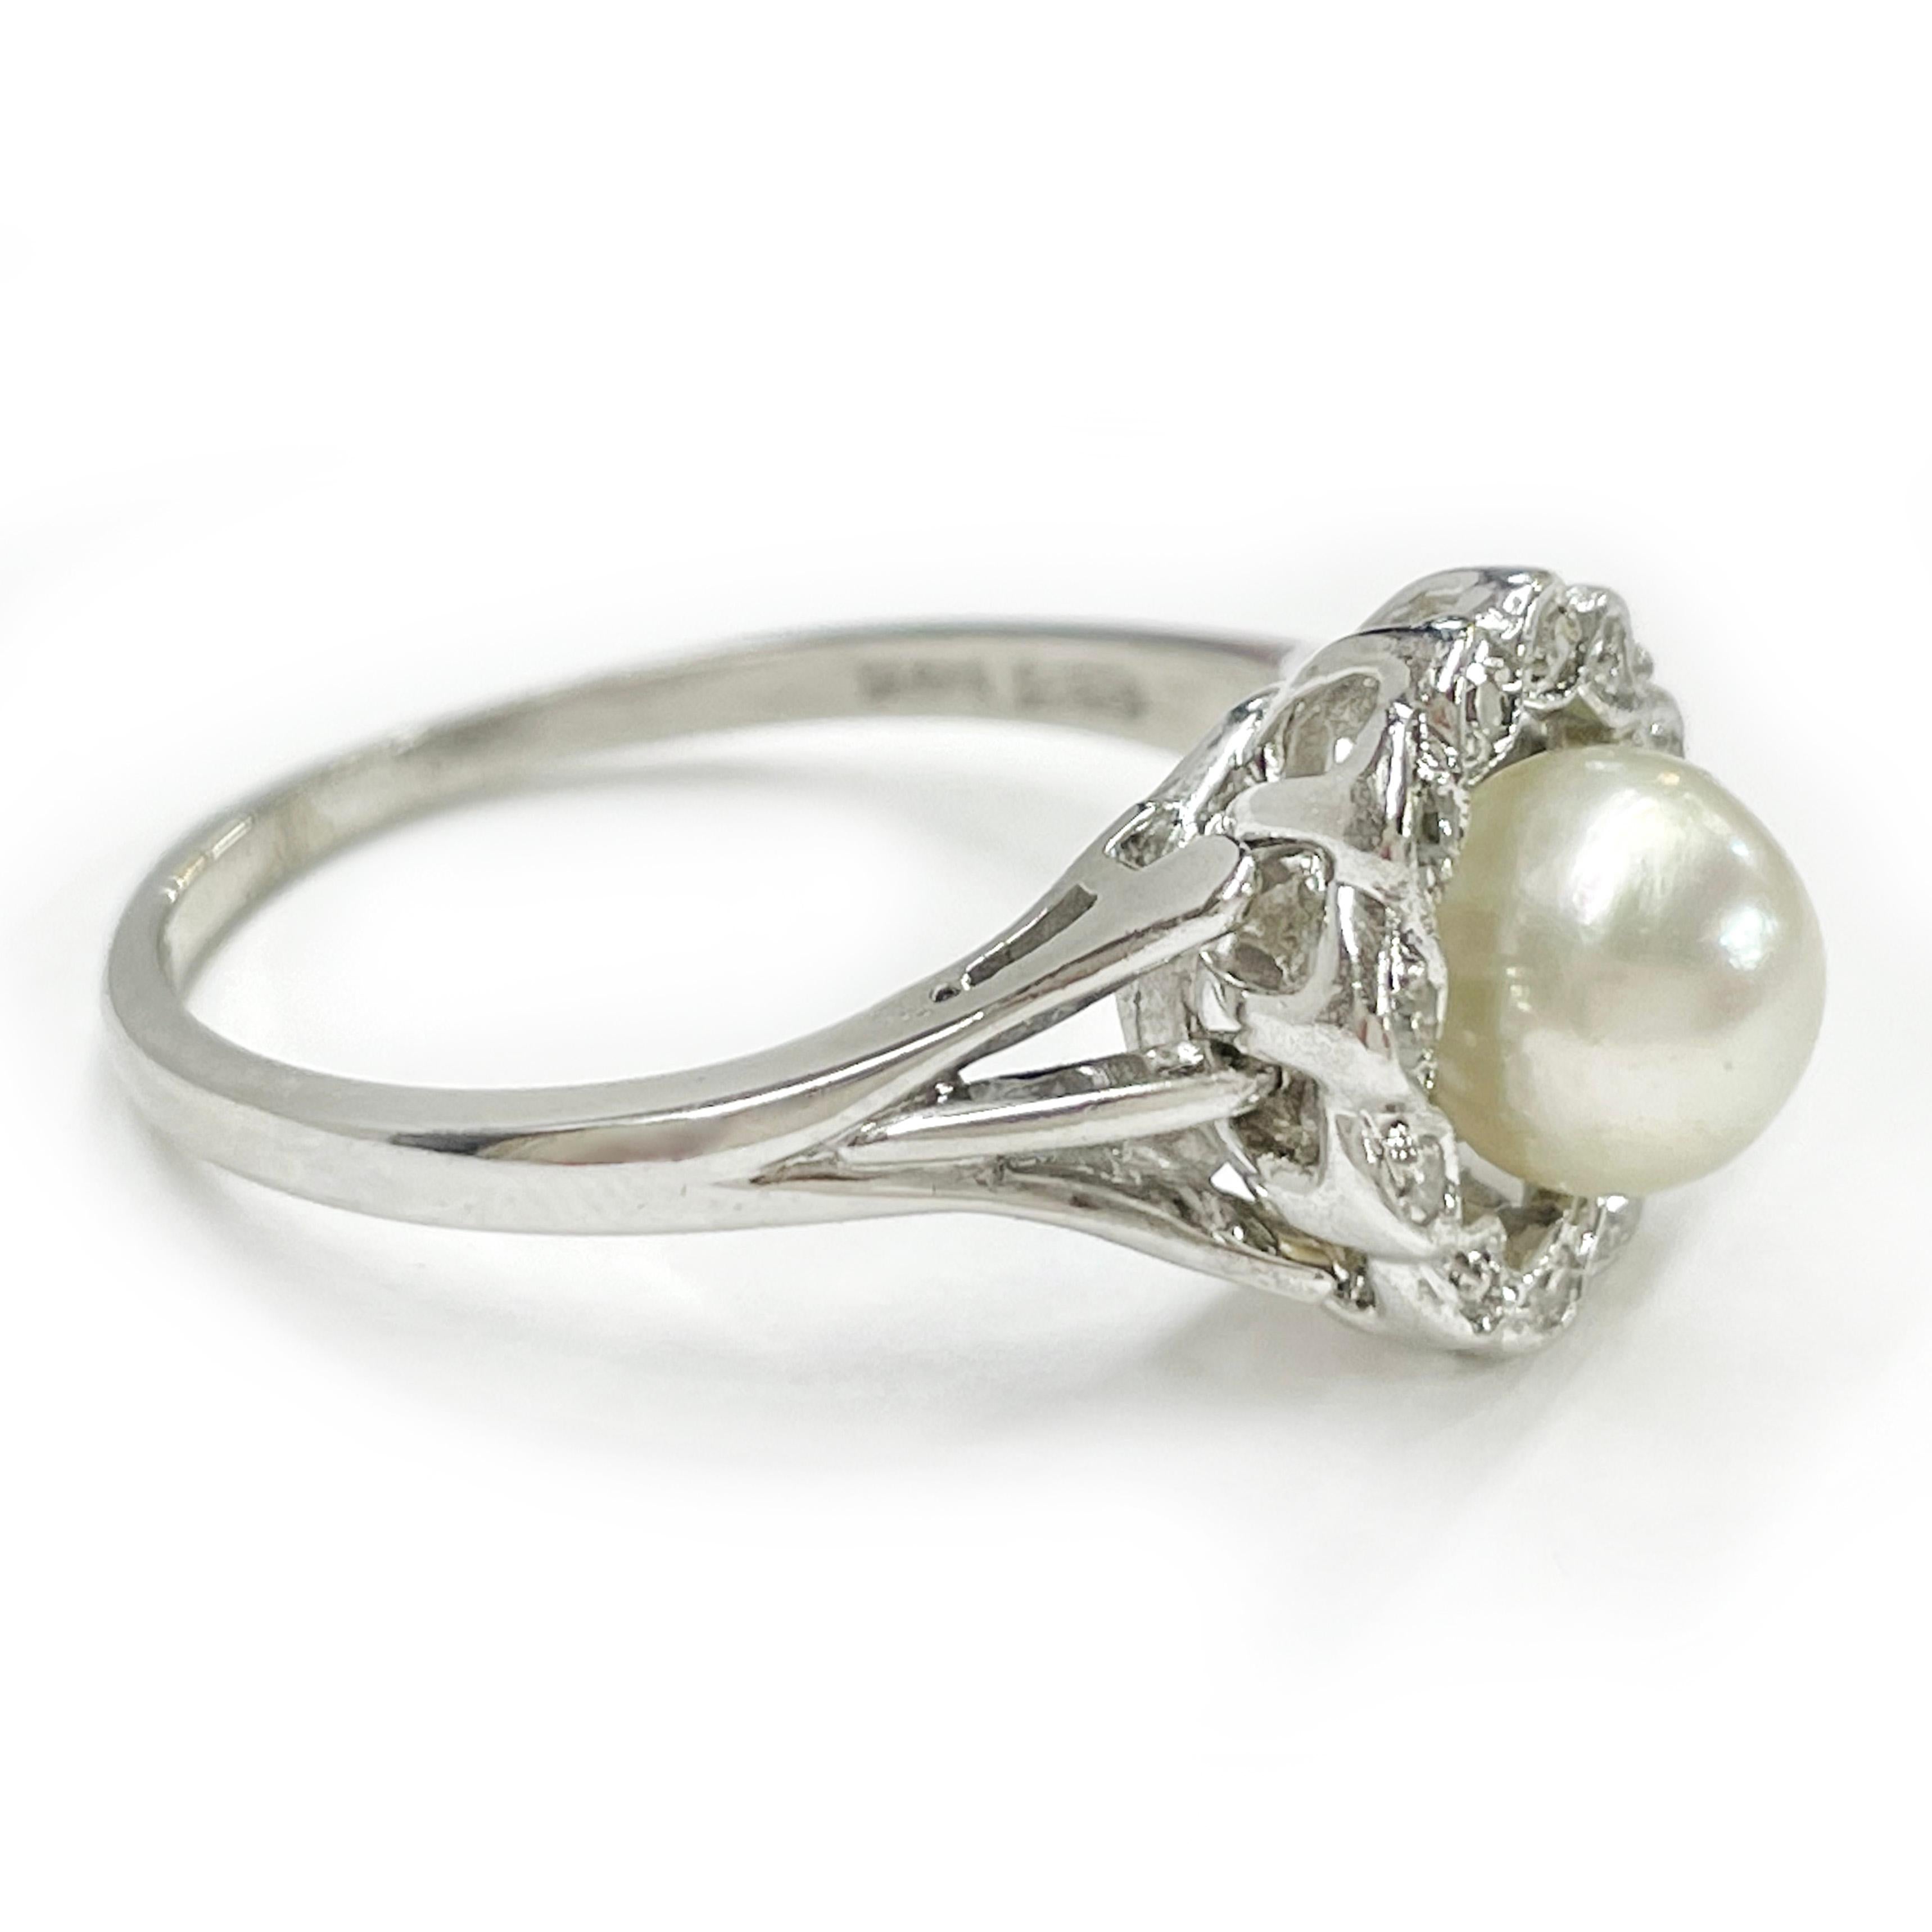 14 Karat White Gold Pearl Diamond Halo Ring. The ring features a center pearl and a halo of twelve round bead-set melee diamonds. The 7mm cultured white pearl has good luster. Around the diamonds is milgrain detail. Stamped on the inside of the band